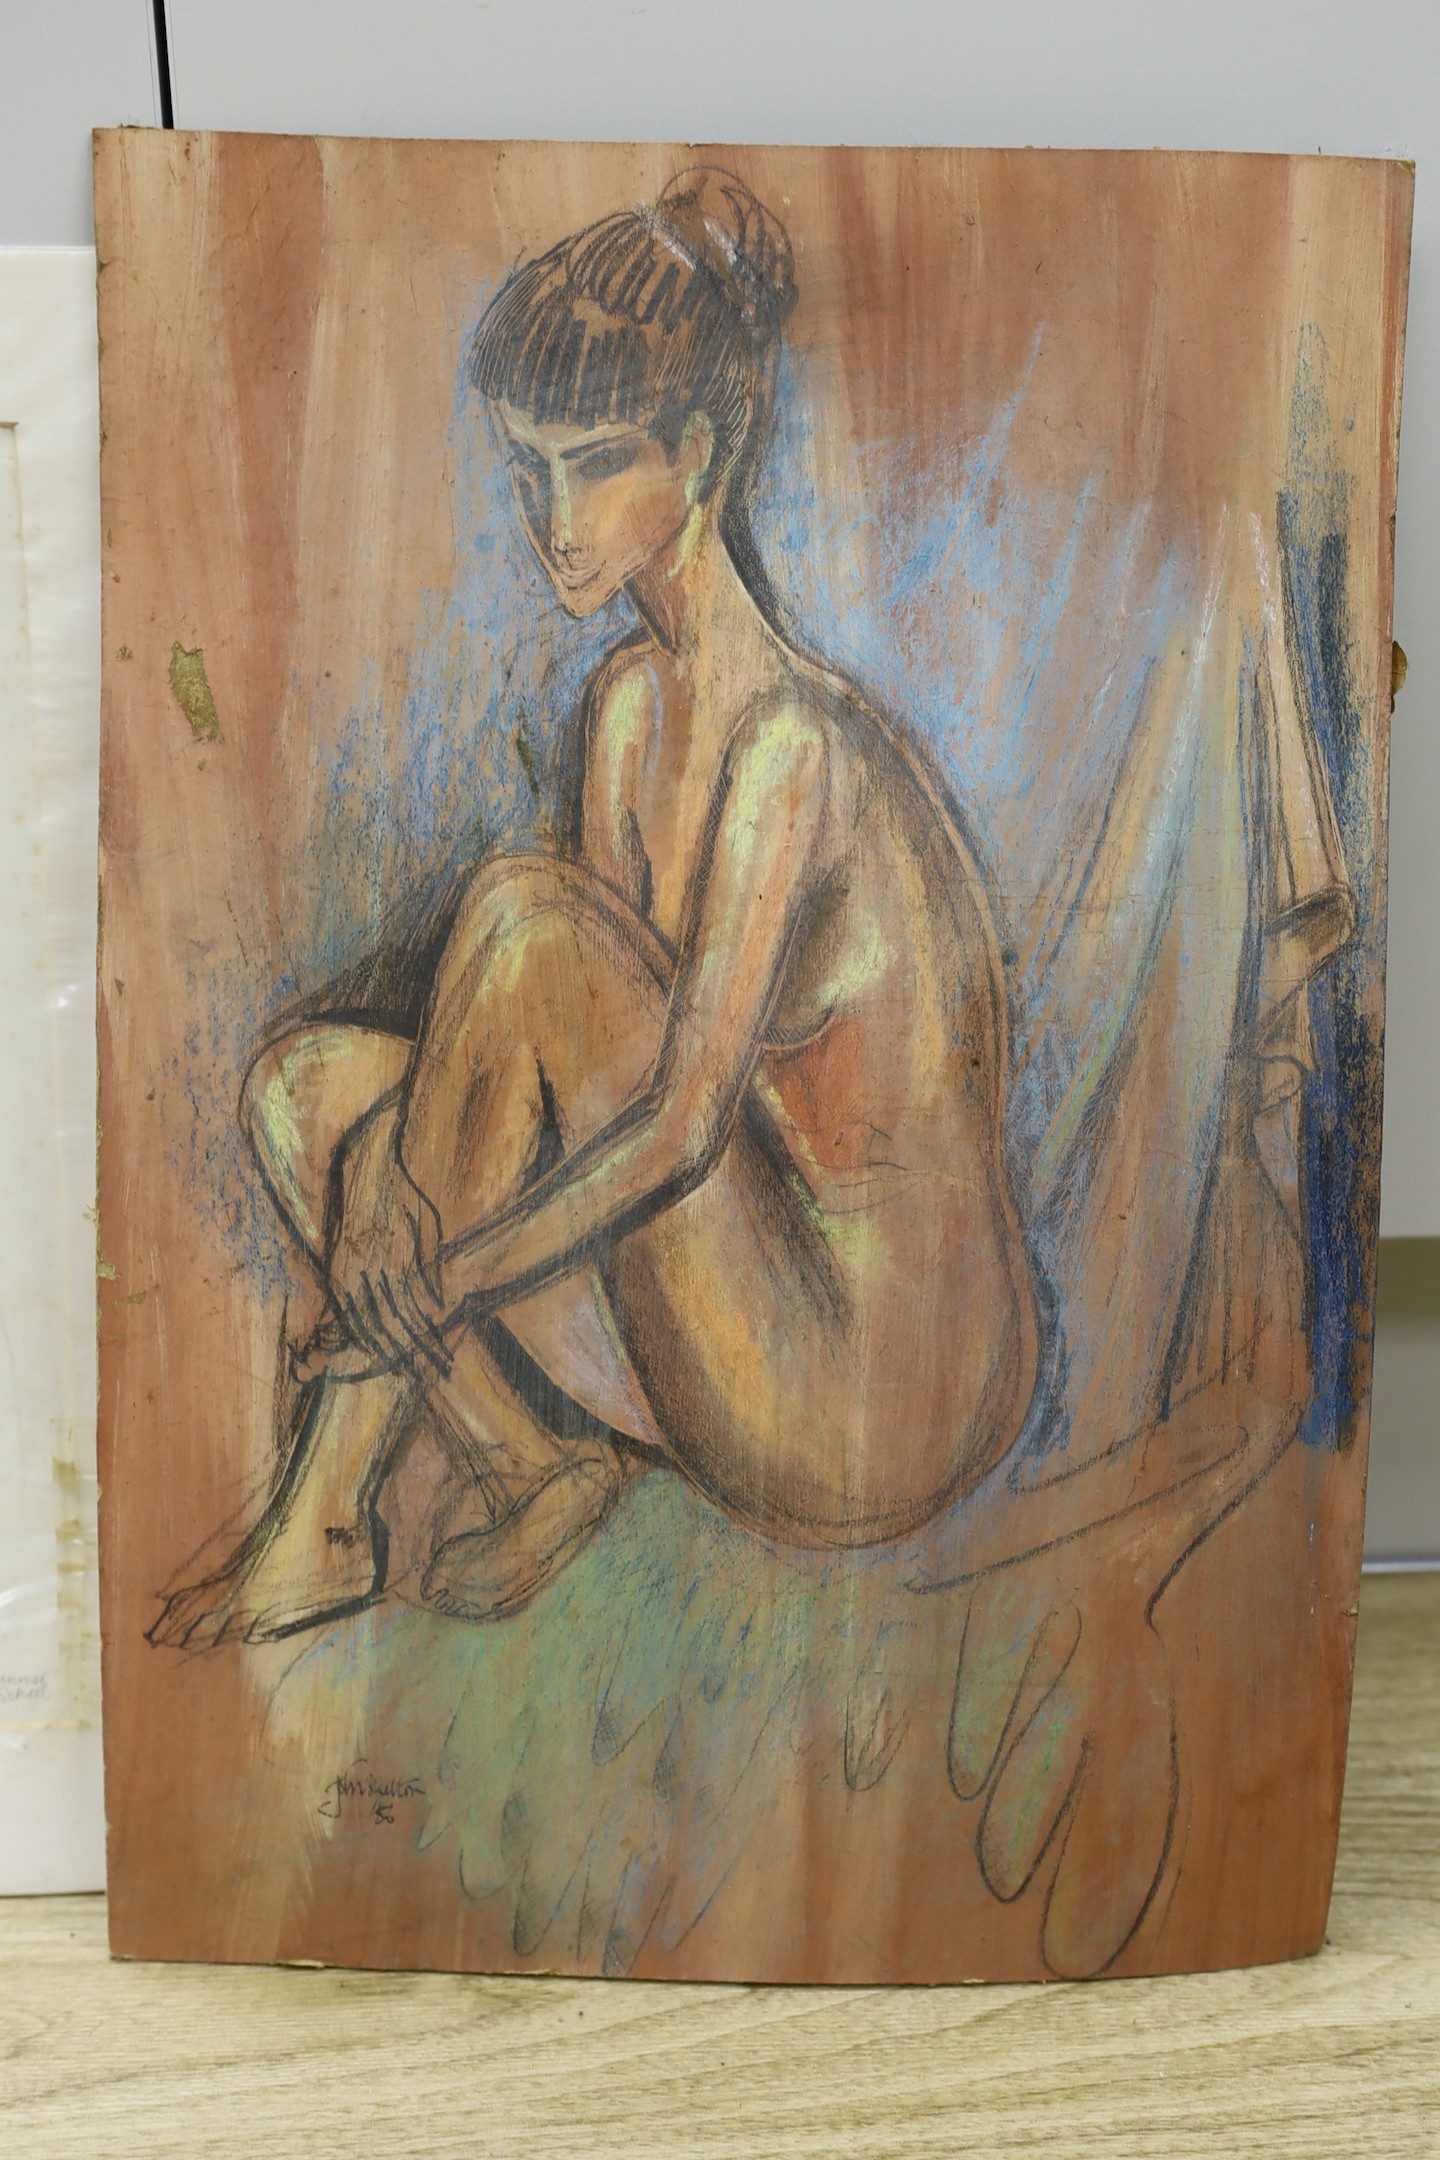 John Skelton (1923-2009) - Sketch of a seated nude, pastel and charcoal on board, signed, dated ‘56, unframed, 50 x 35cms. and head and shoulders study, charcoal on paper, signed and dated 3rd Aug. ‘77, inscribed “‘RAD S